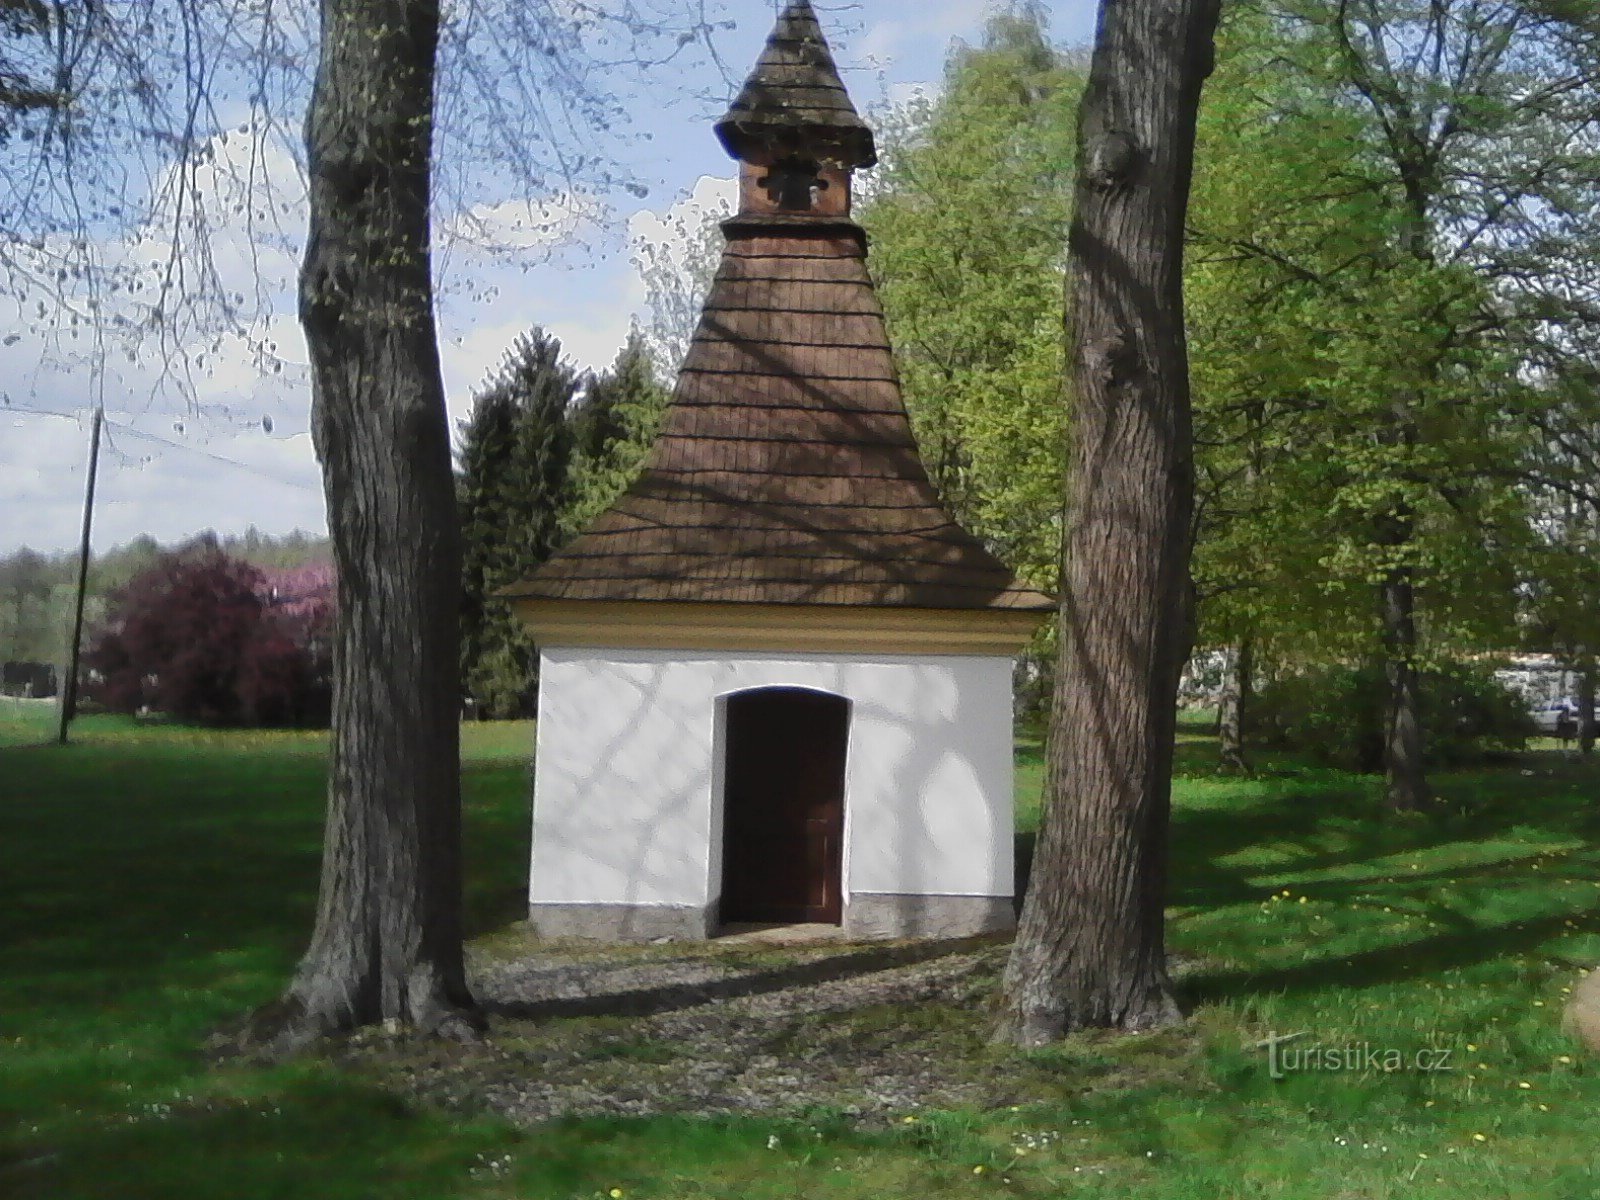 1. Village chapel of St. Anna in Leskovice from the turn of the 18th and 19th centuries.